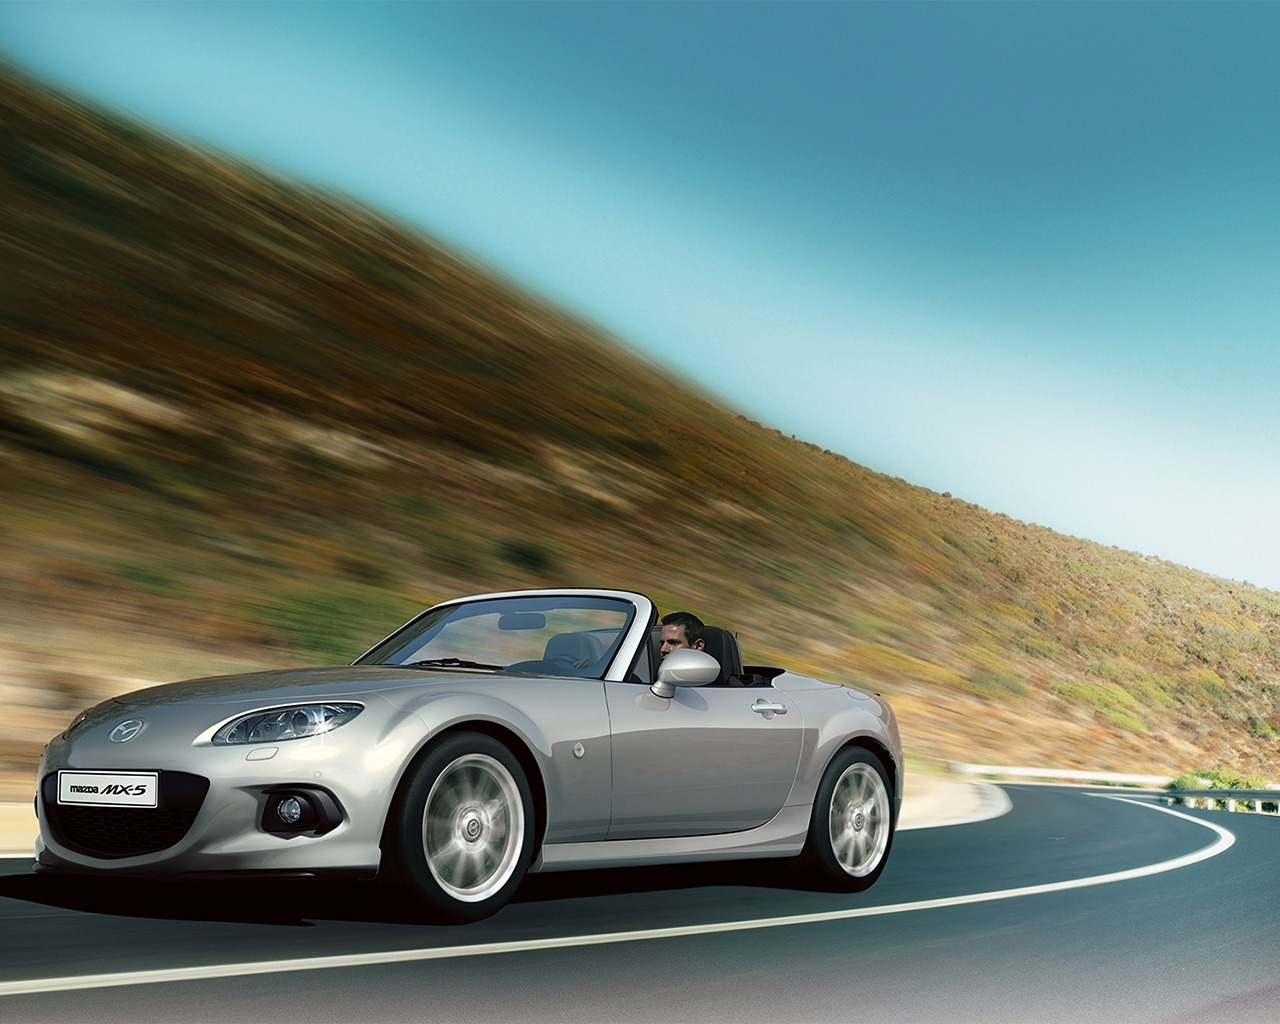 MX 5 Mazda Roadster Speed for 1280 x 1024 resolution